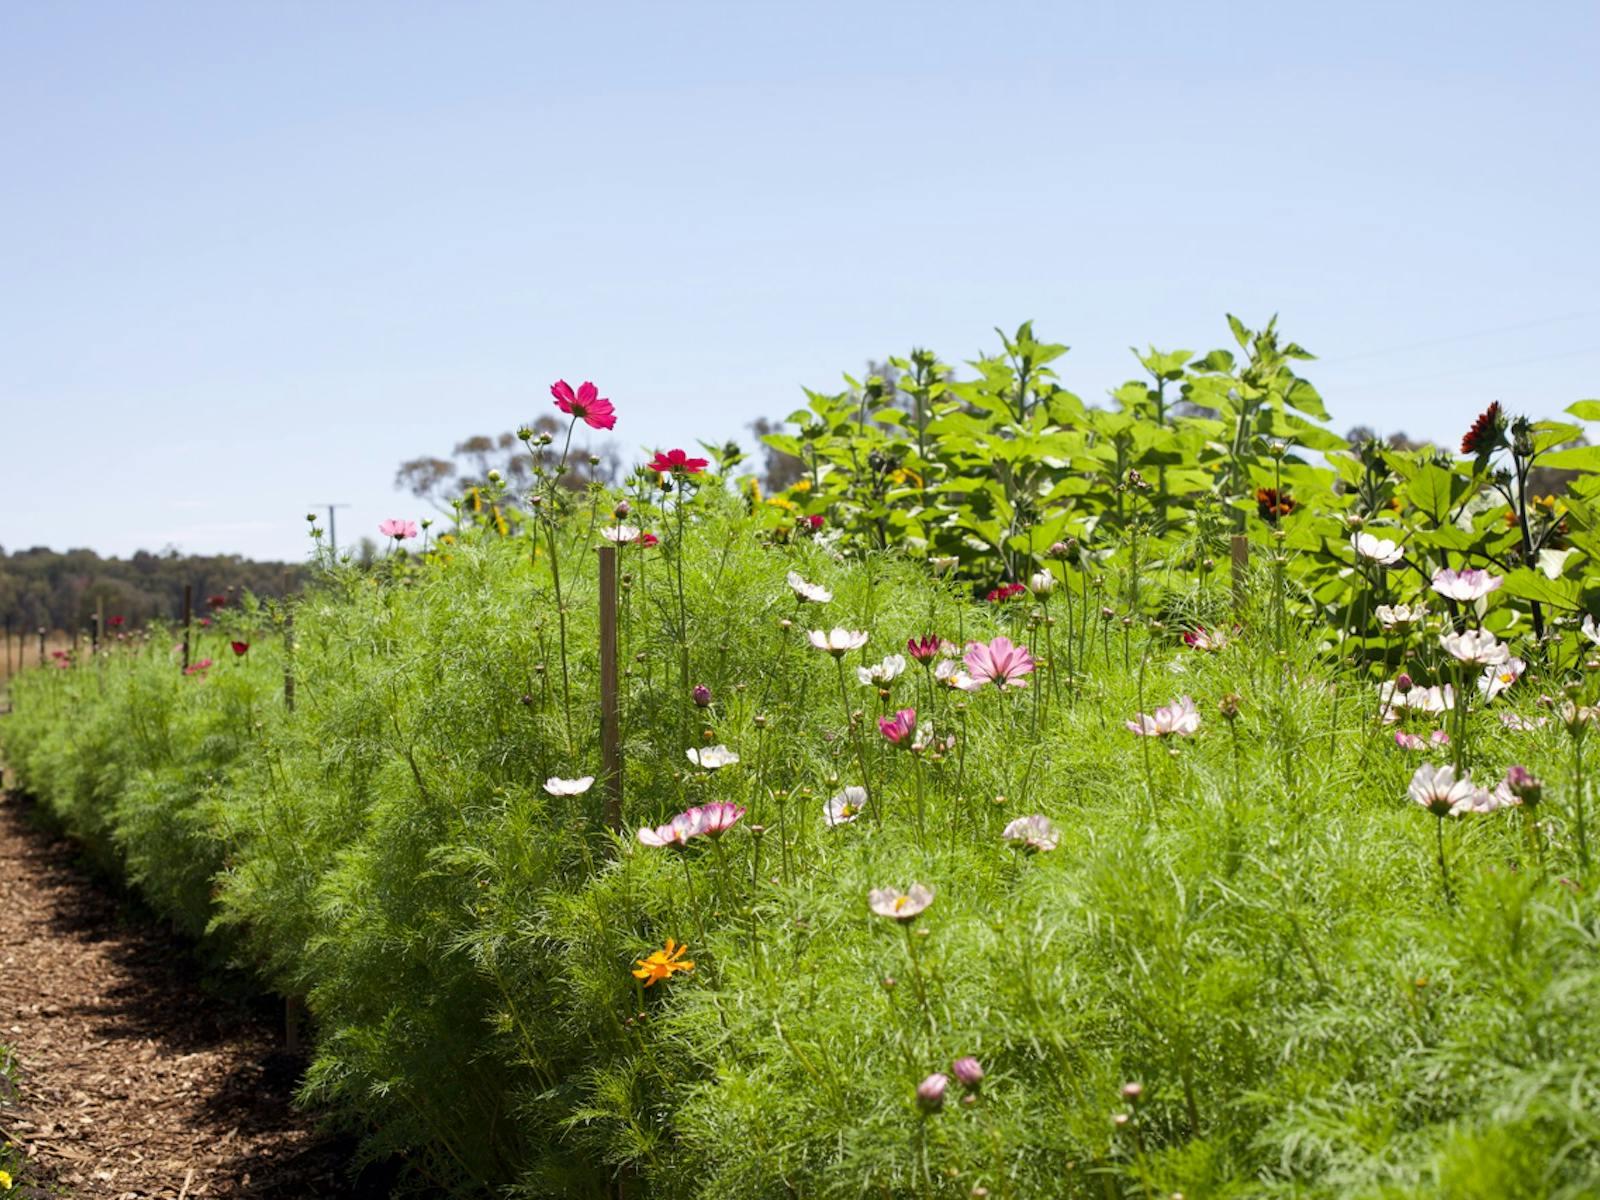 A row of white-pink flowers and lush green foliage sit in a neat row under a clear blue sky